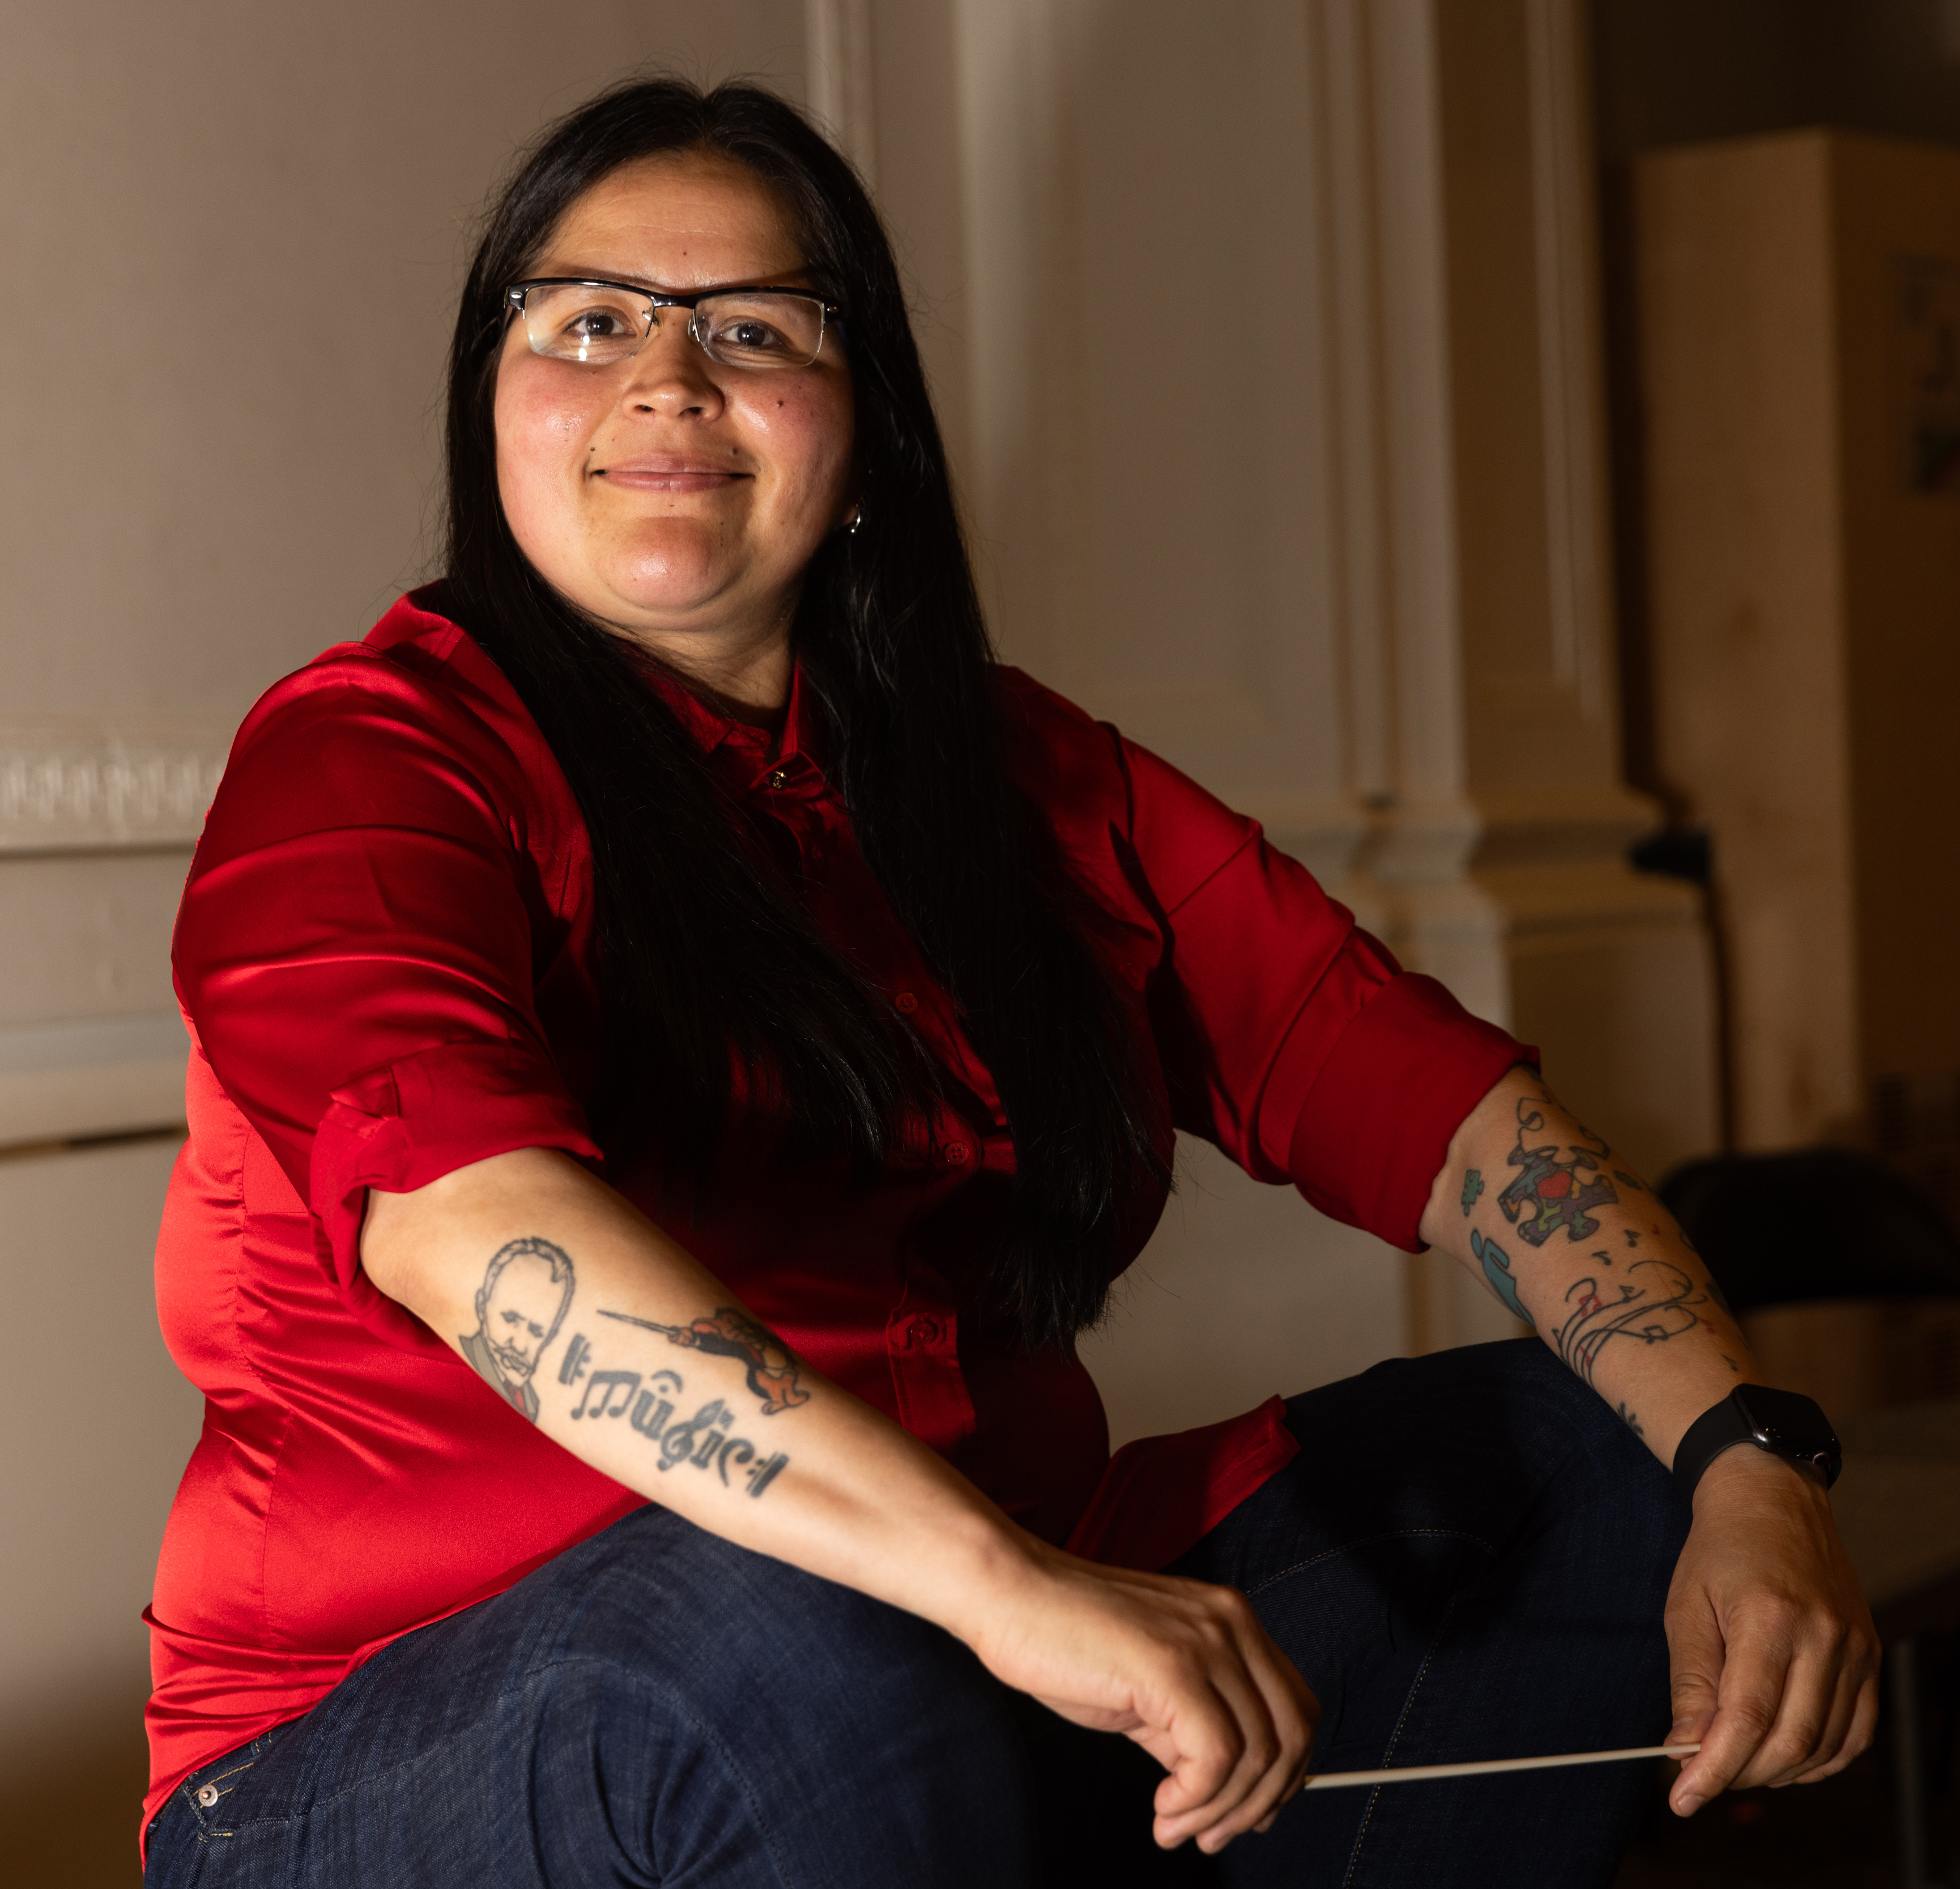 A person with long dark hair and glasses is seated, wearing a red shirt and blue jeans. They have visible tattoos on both forearms and are holding a conductor’s baton.